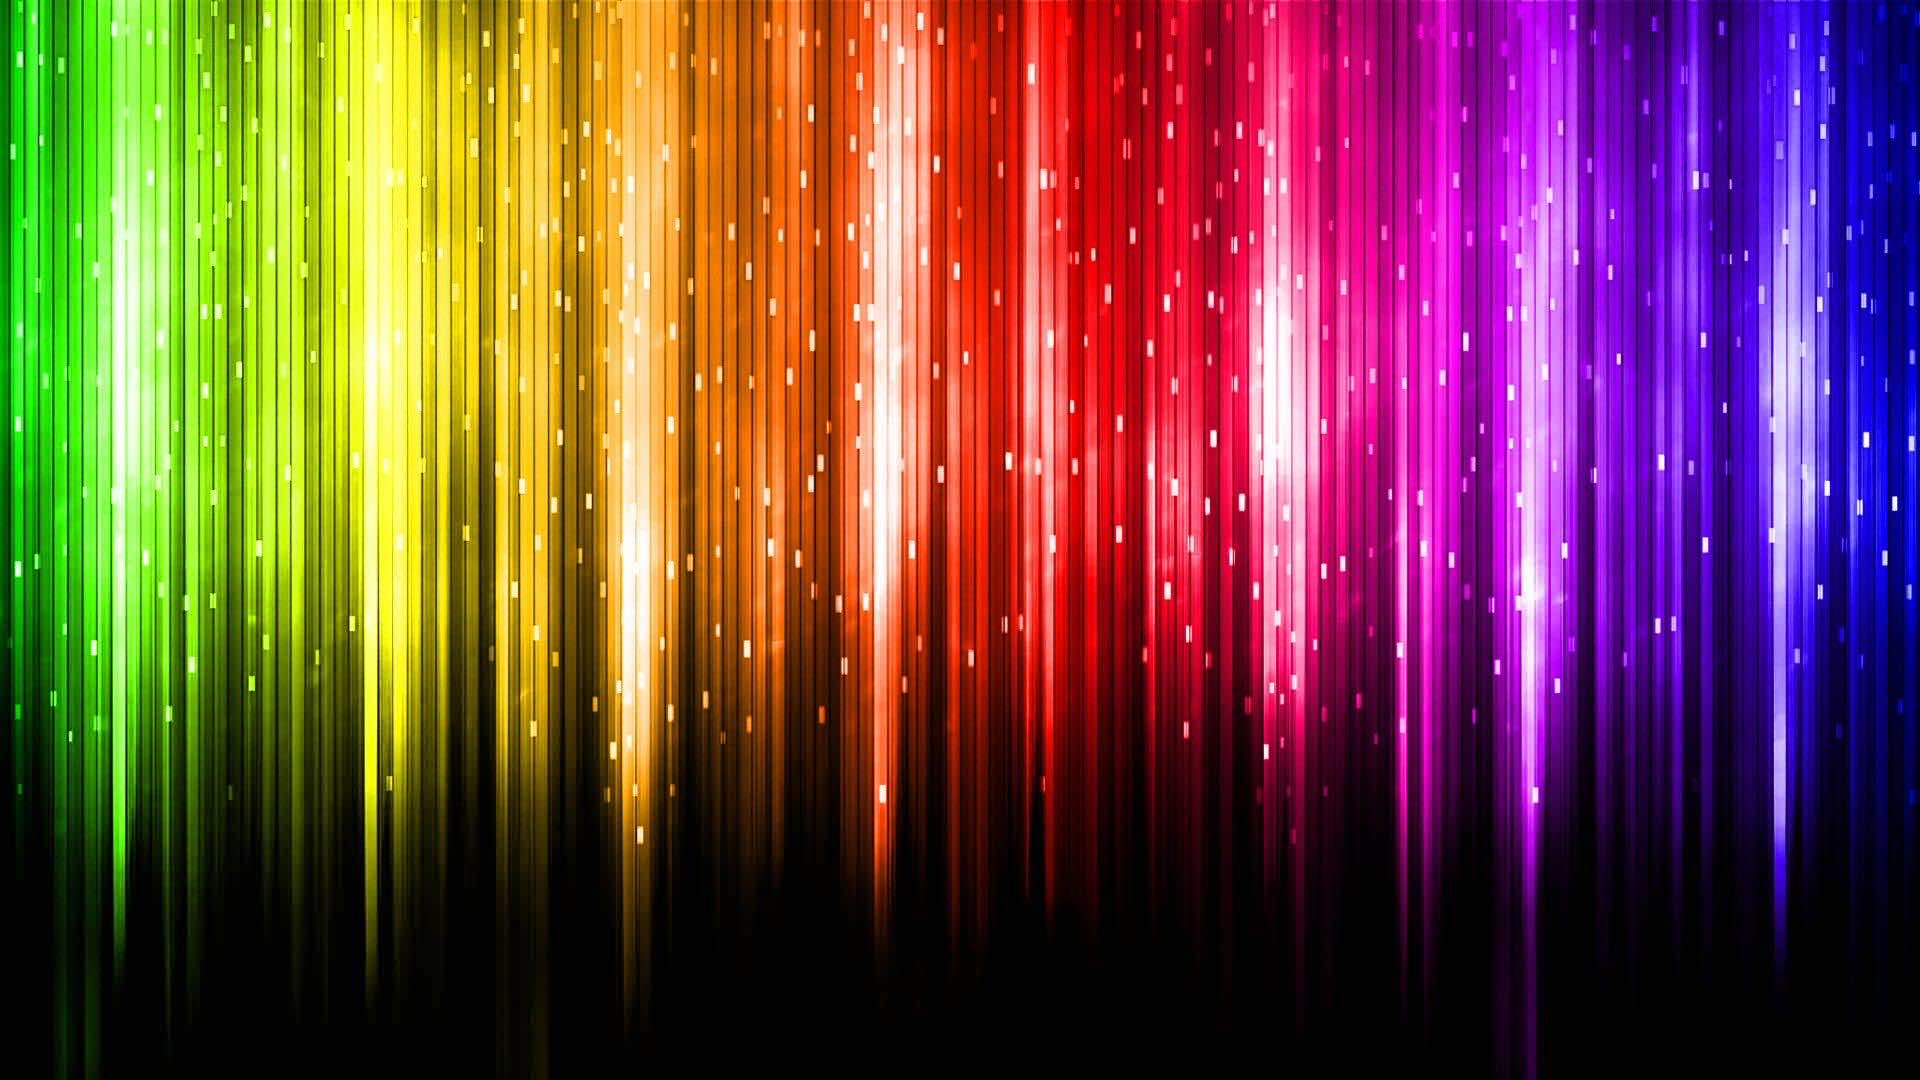 Hd Digital Wallpaper Backgrounds For Free Download